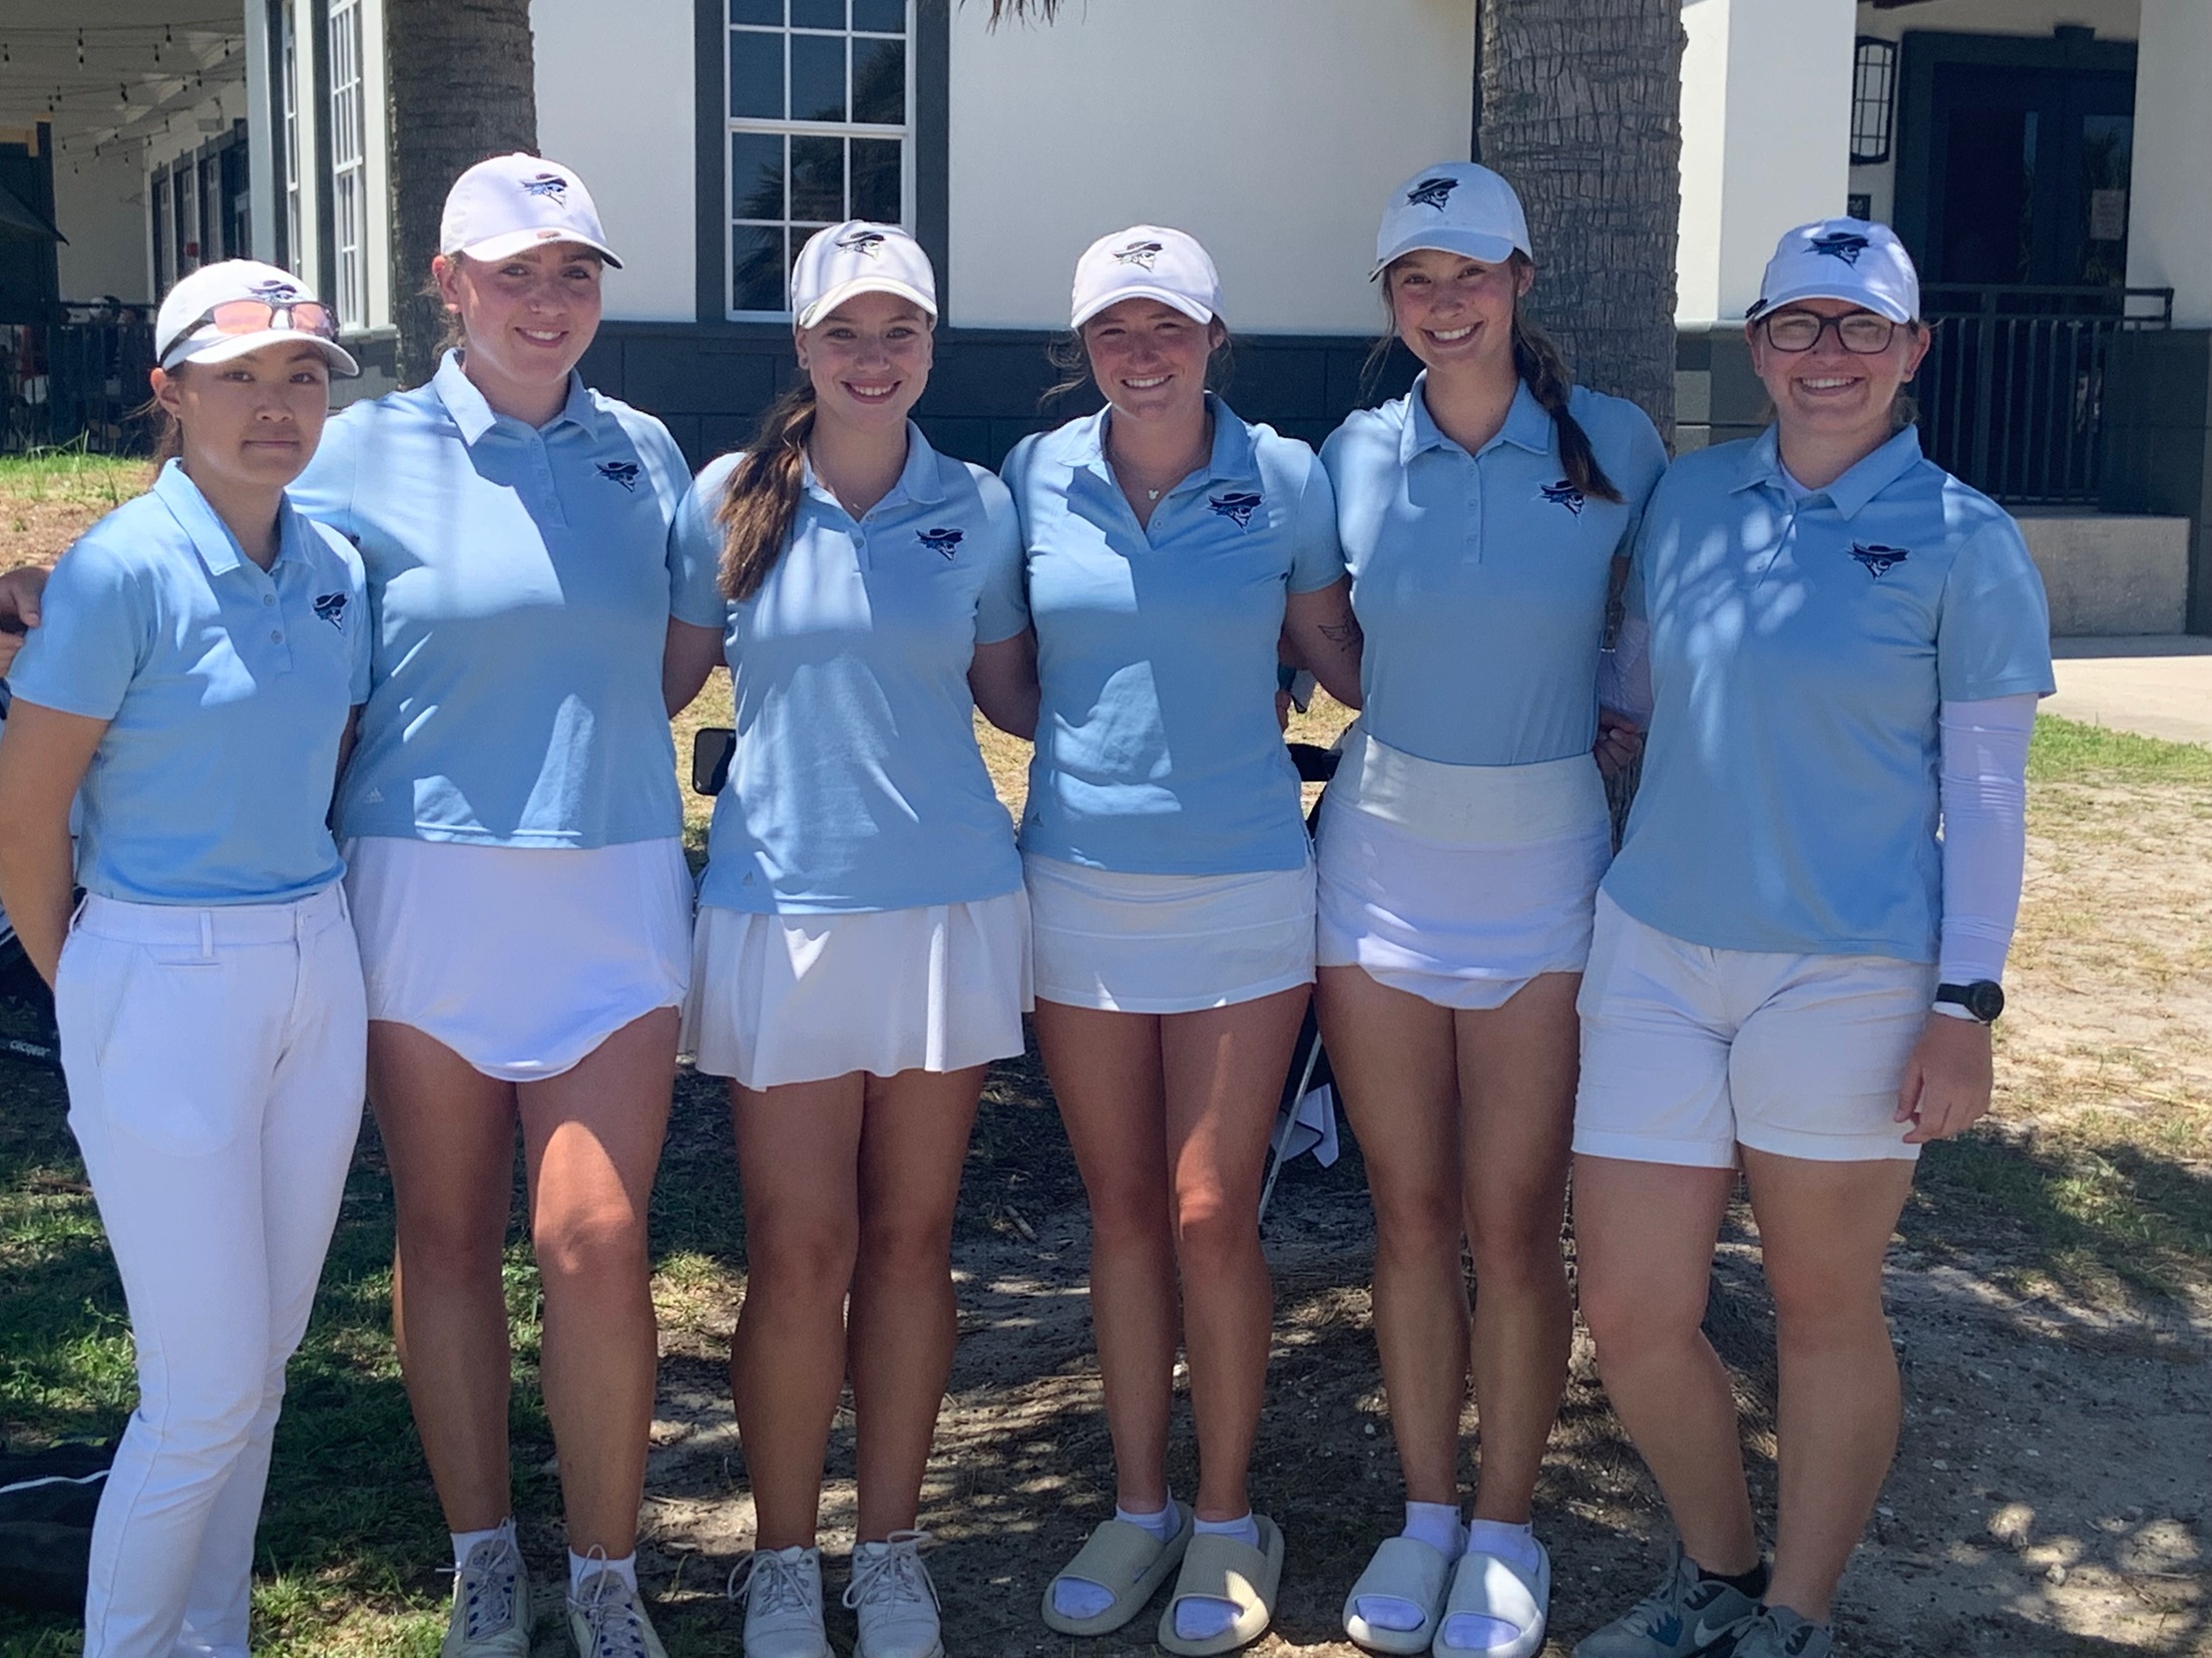 Women's Golf Team Finishes the Season in 6th Place